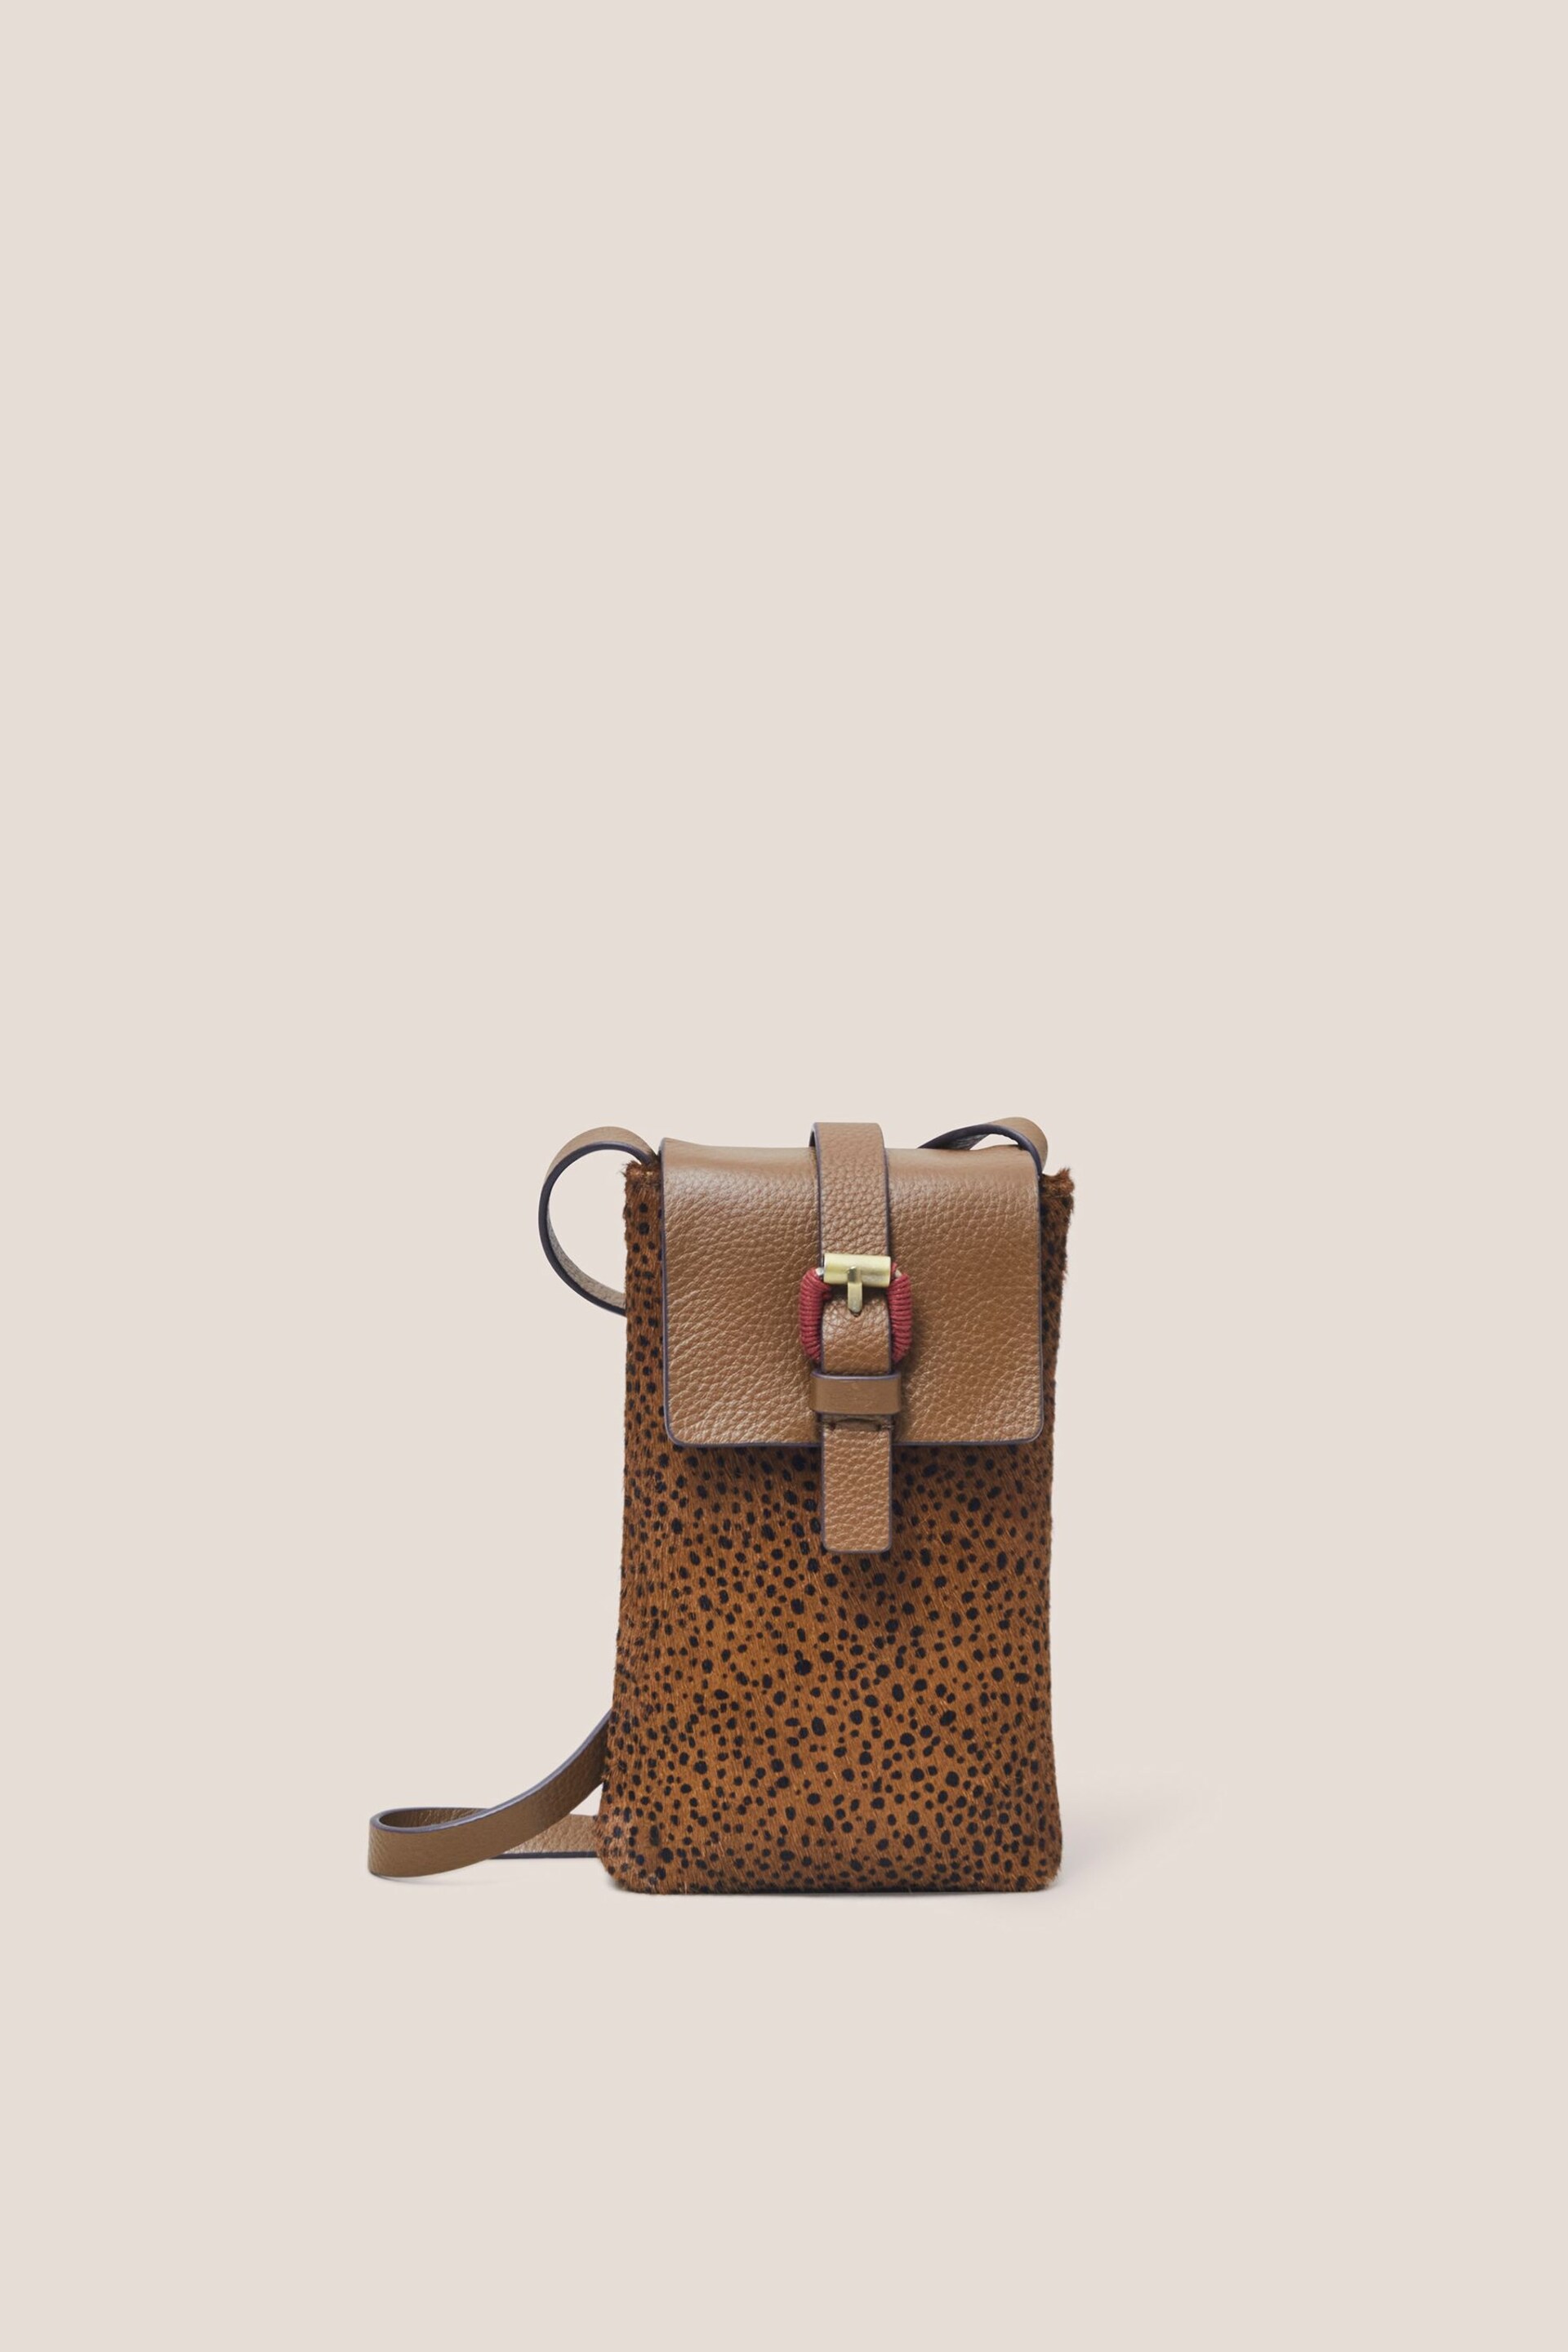 White Stuff Brown Clara Buckle Leather Phone Bag - Image 1 of 3